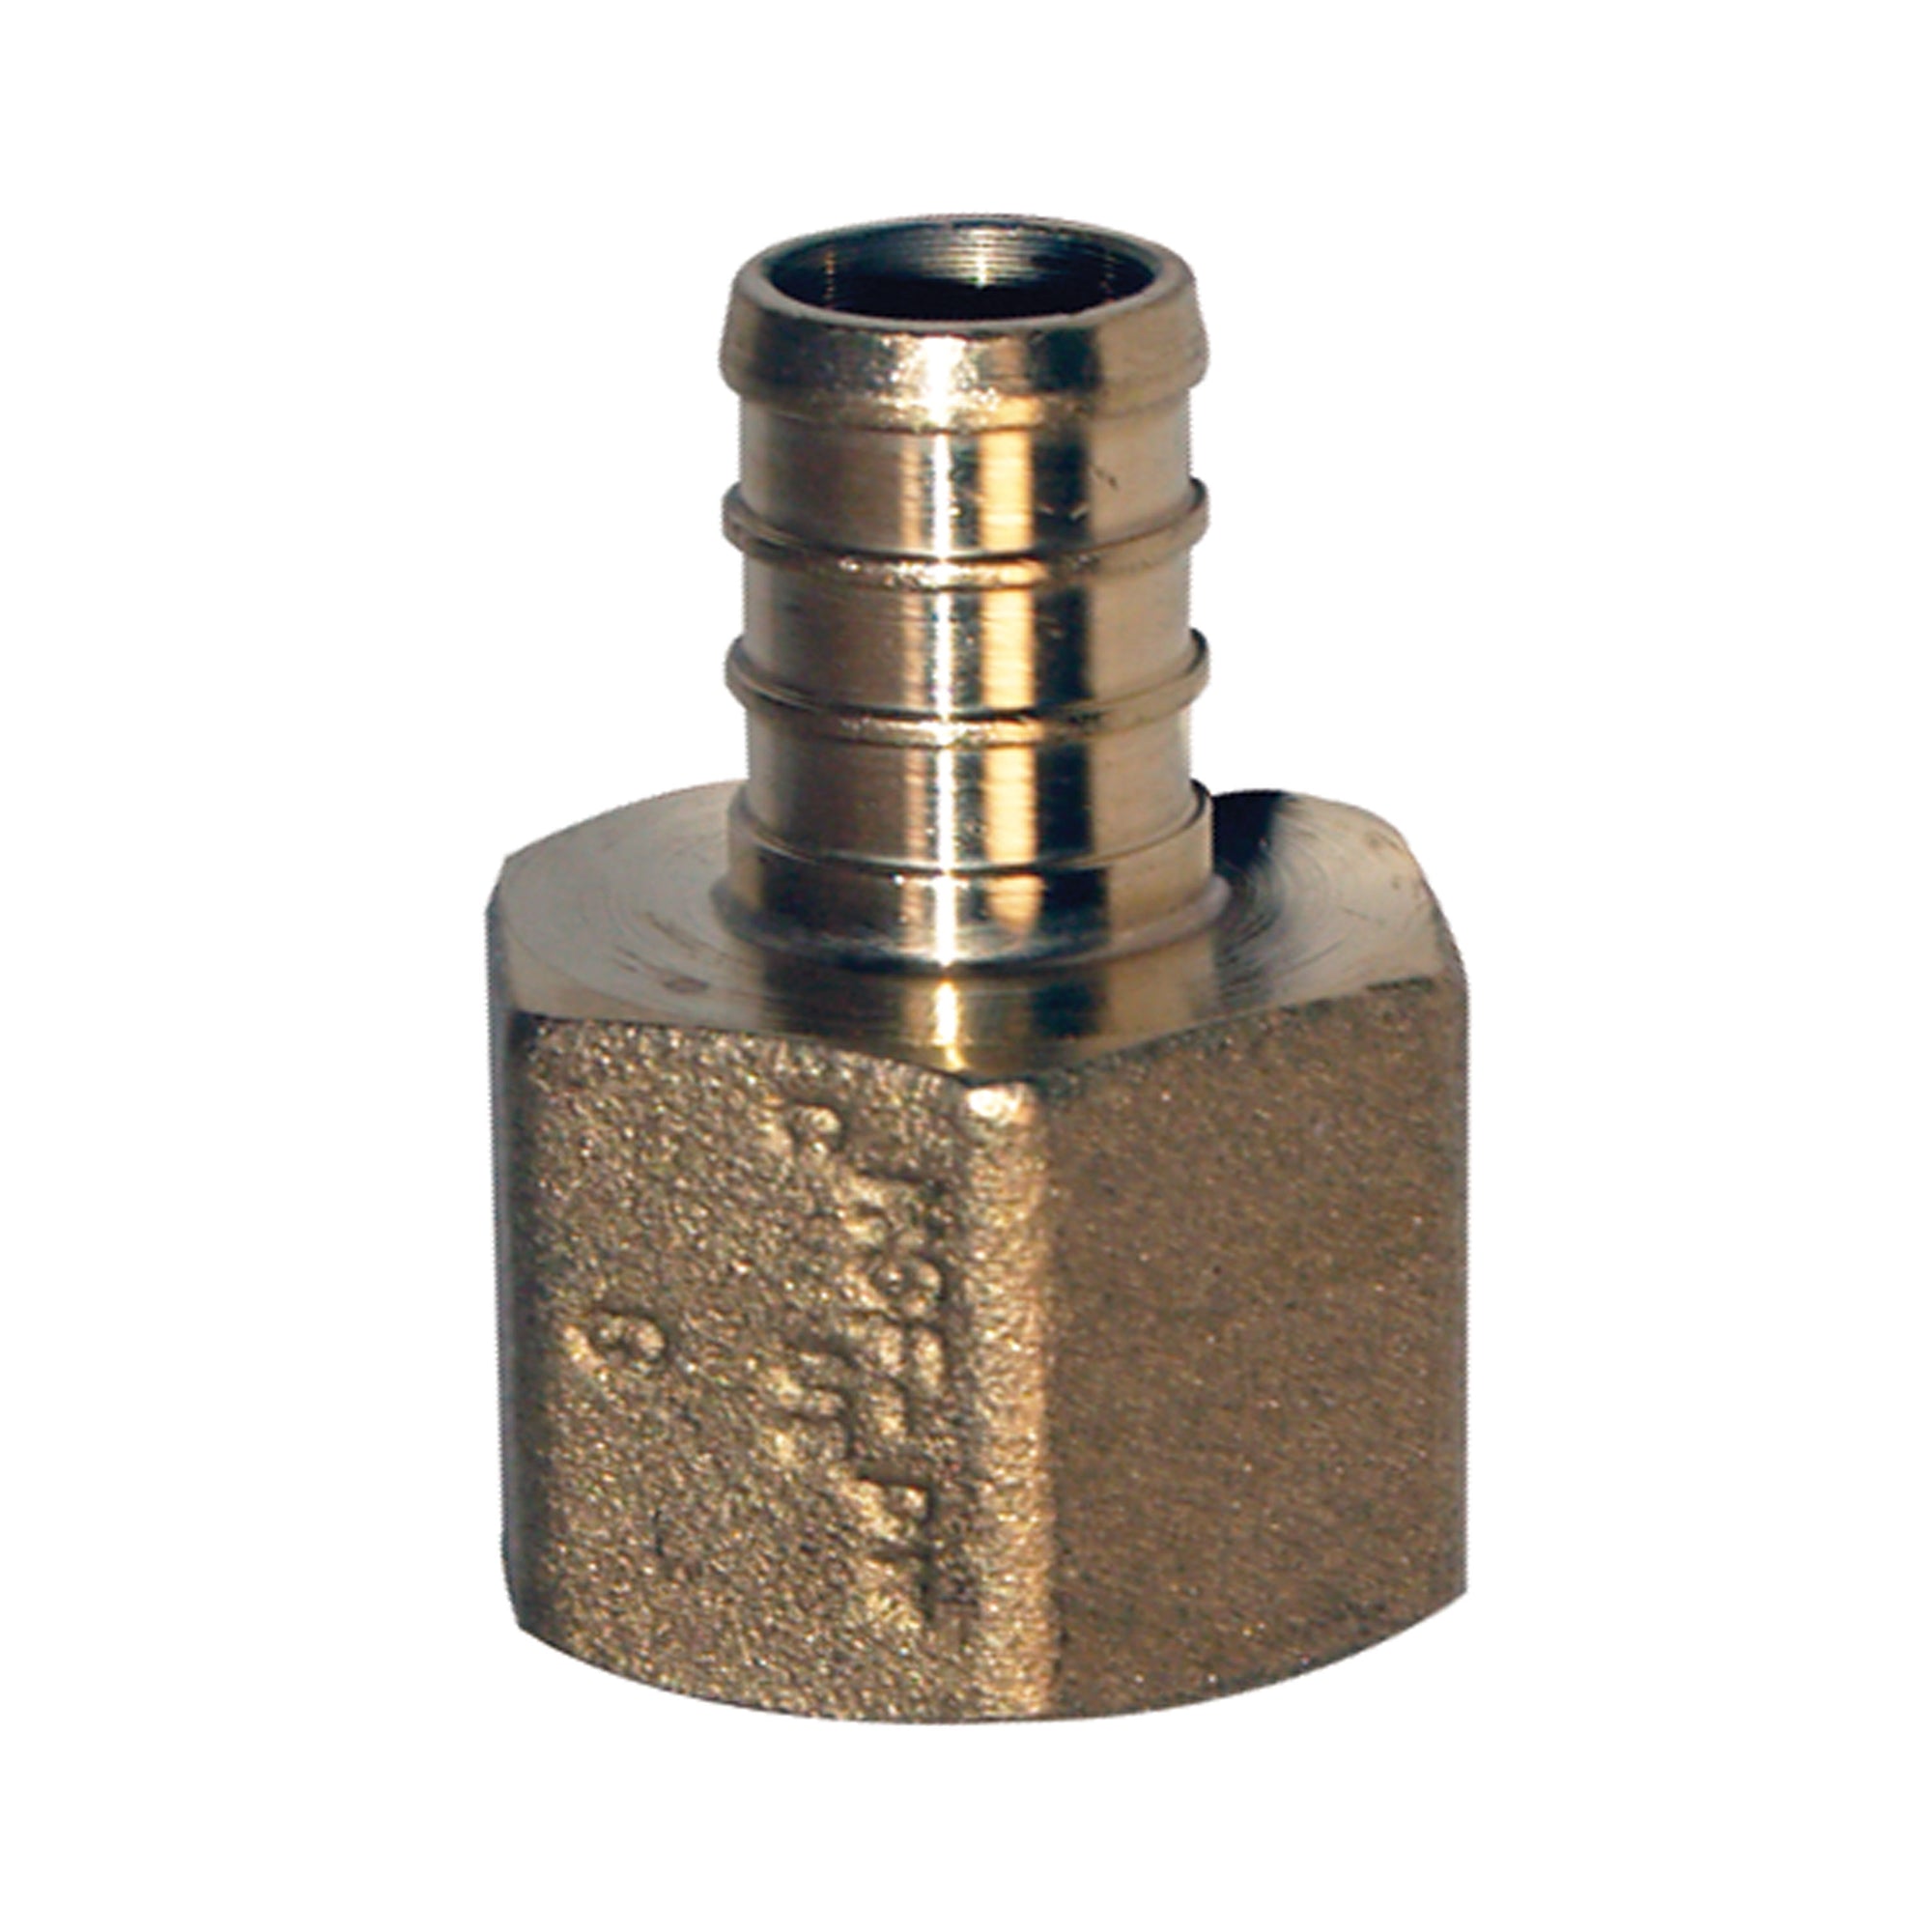 Flair-It 51130 BestPEX Brass Female Adapter - 3/4" x 3/4" FPT